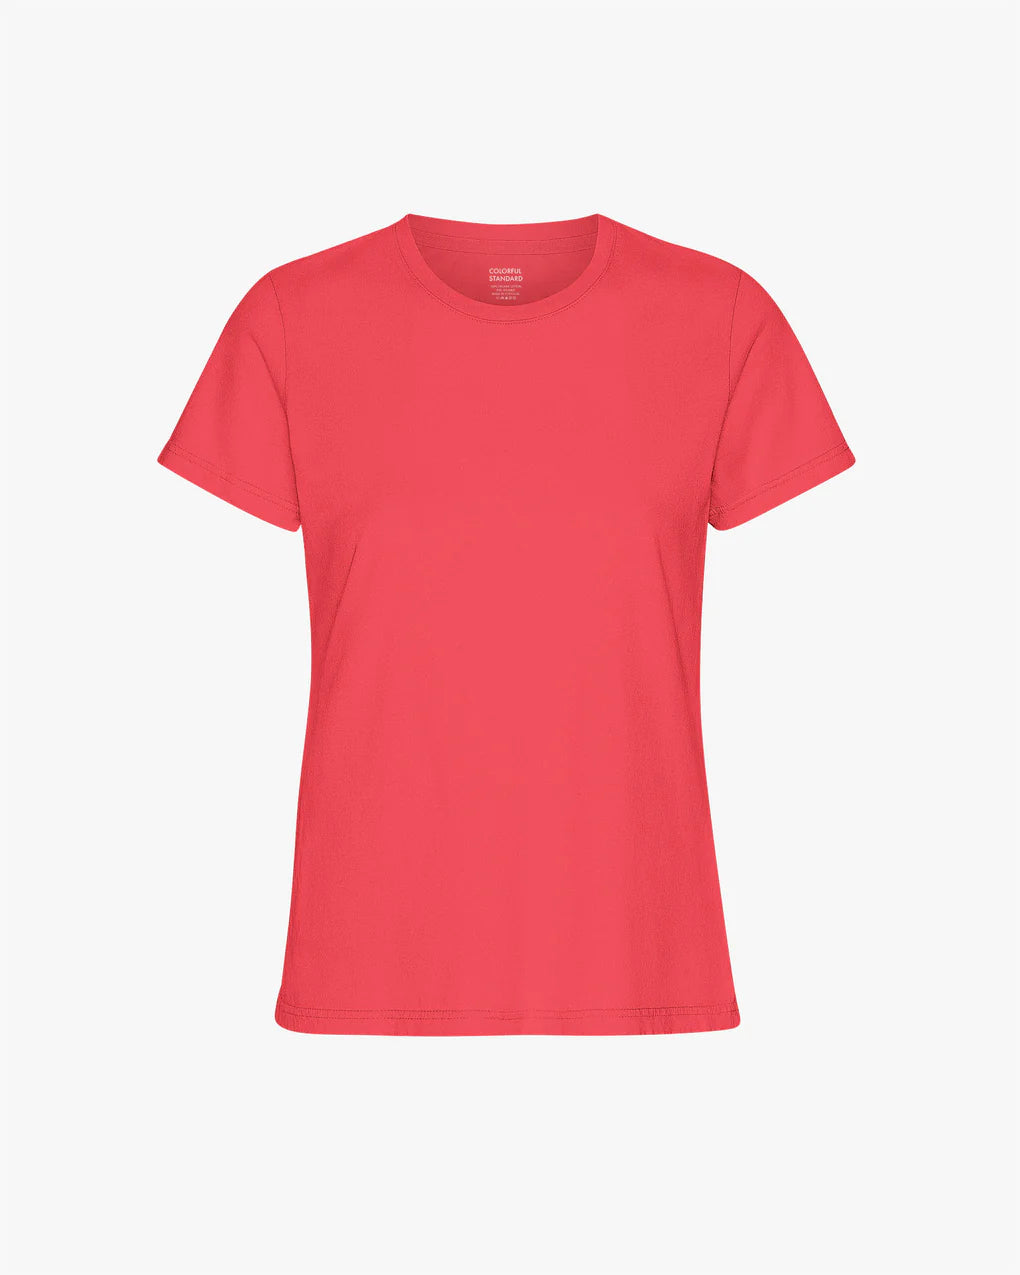 Light Organic Tee - Tangerine Red made by Colorful Standard on a white background.